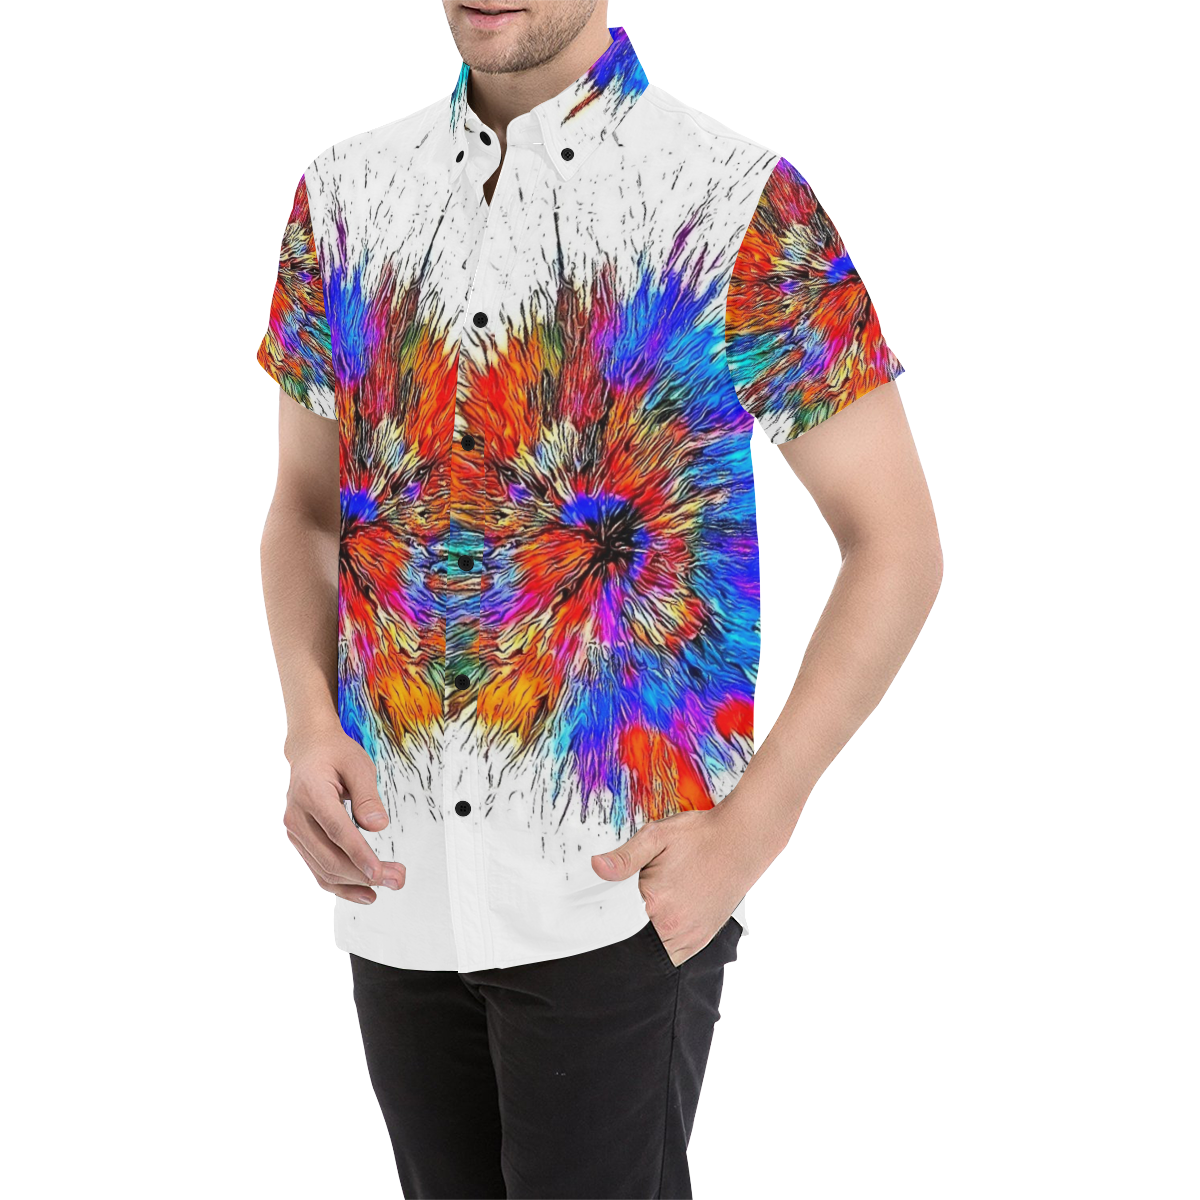 Popart Bang by Nico Bielow Men's All Over Print Short Sleeve Shirt (Model T53)